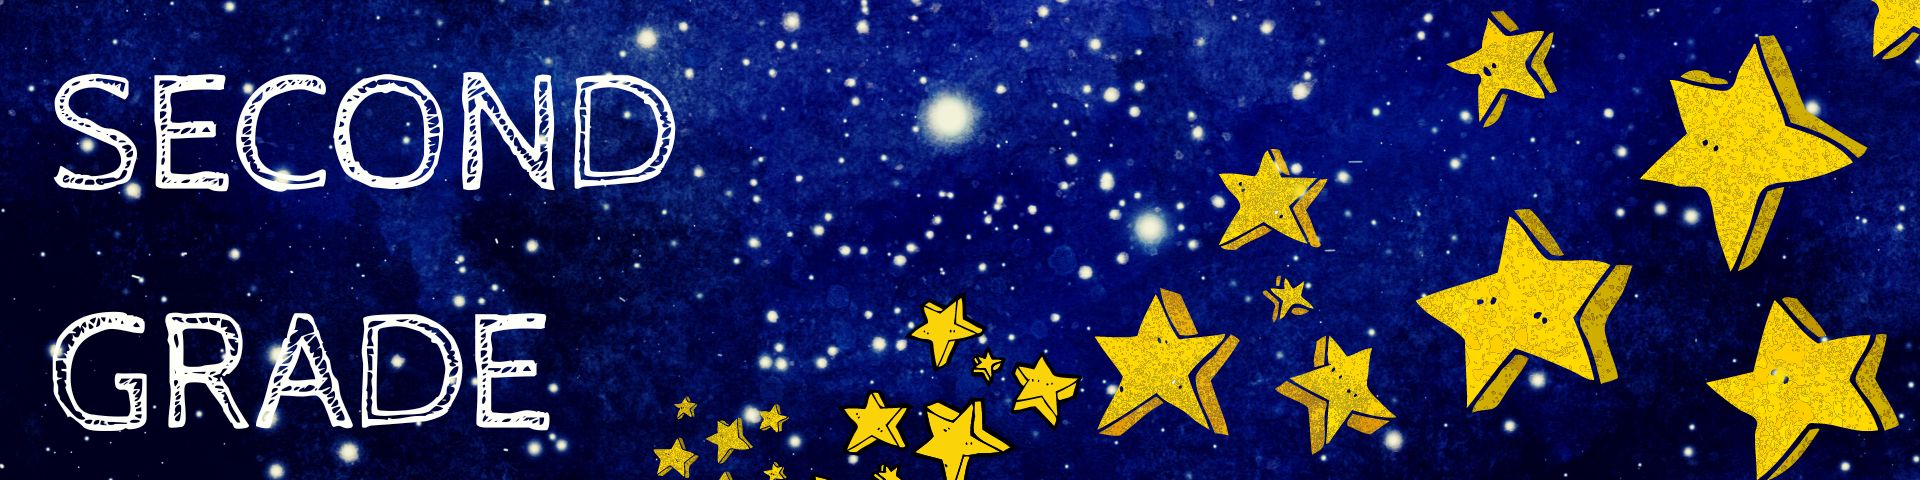 2nd grade with stars and night sky background